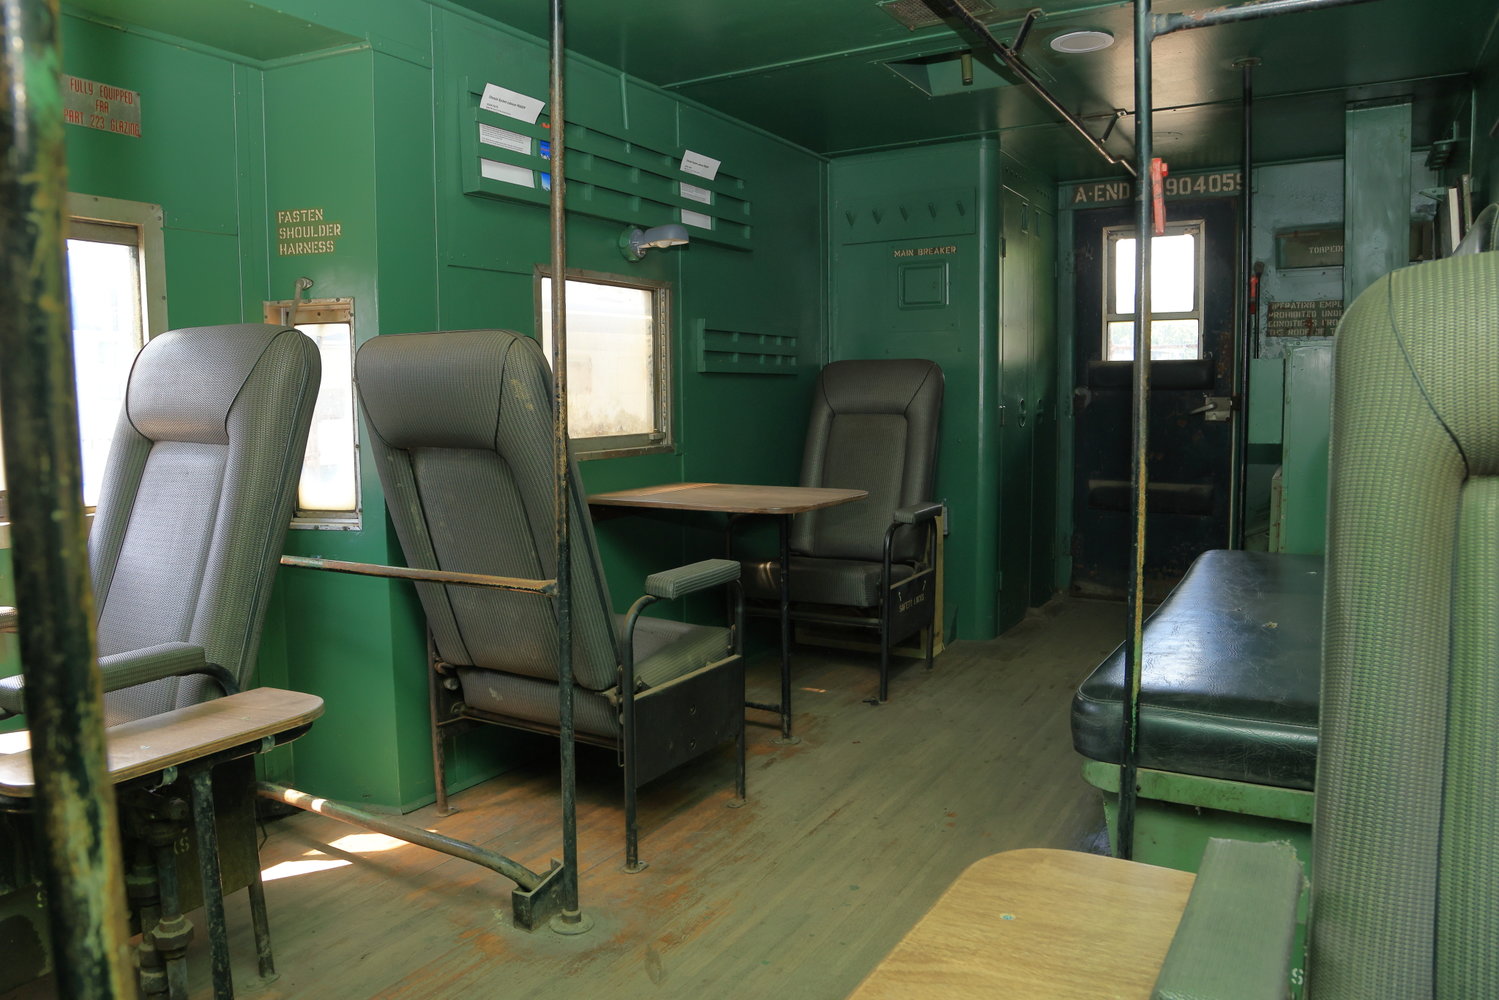 Inside Caboose No. 904059, showing seating and convertible bunk area.